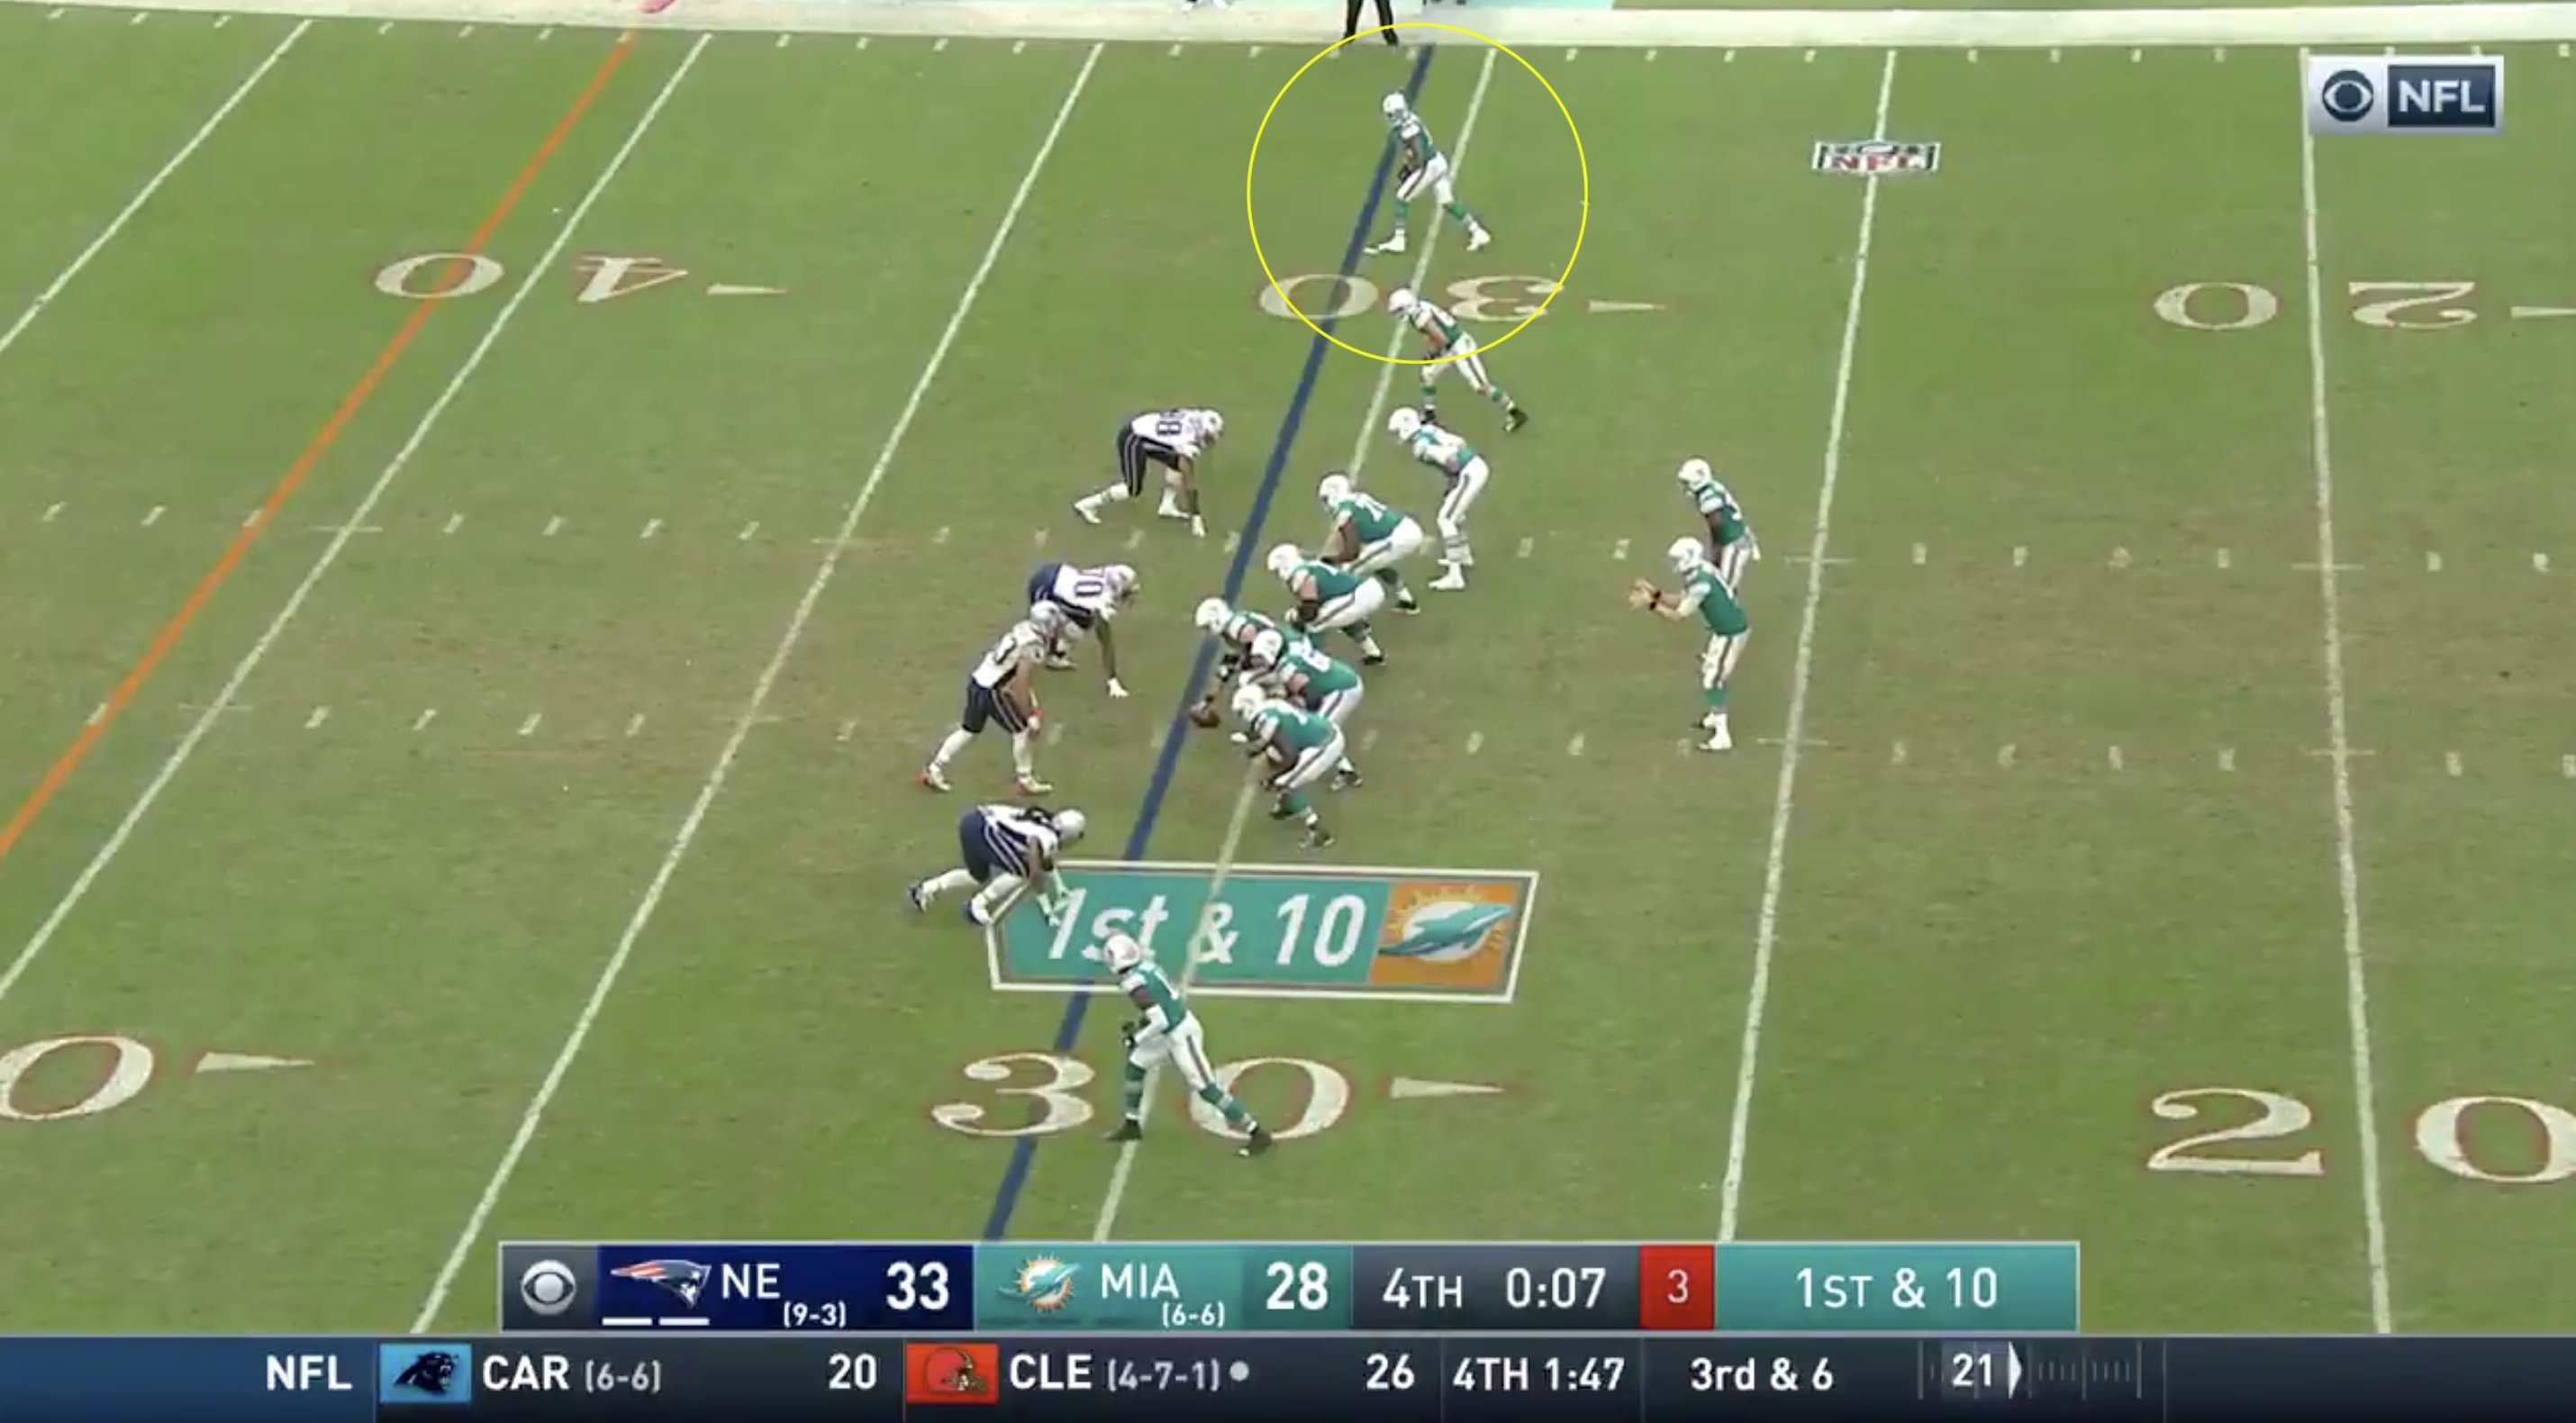 PLAYBOOK: Miami Dolphins resort to RUGBY to win the match with last play of the game